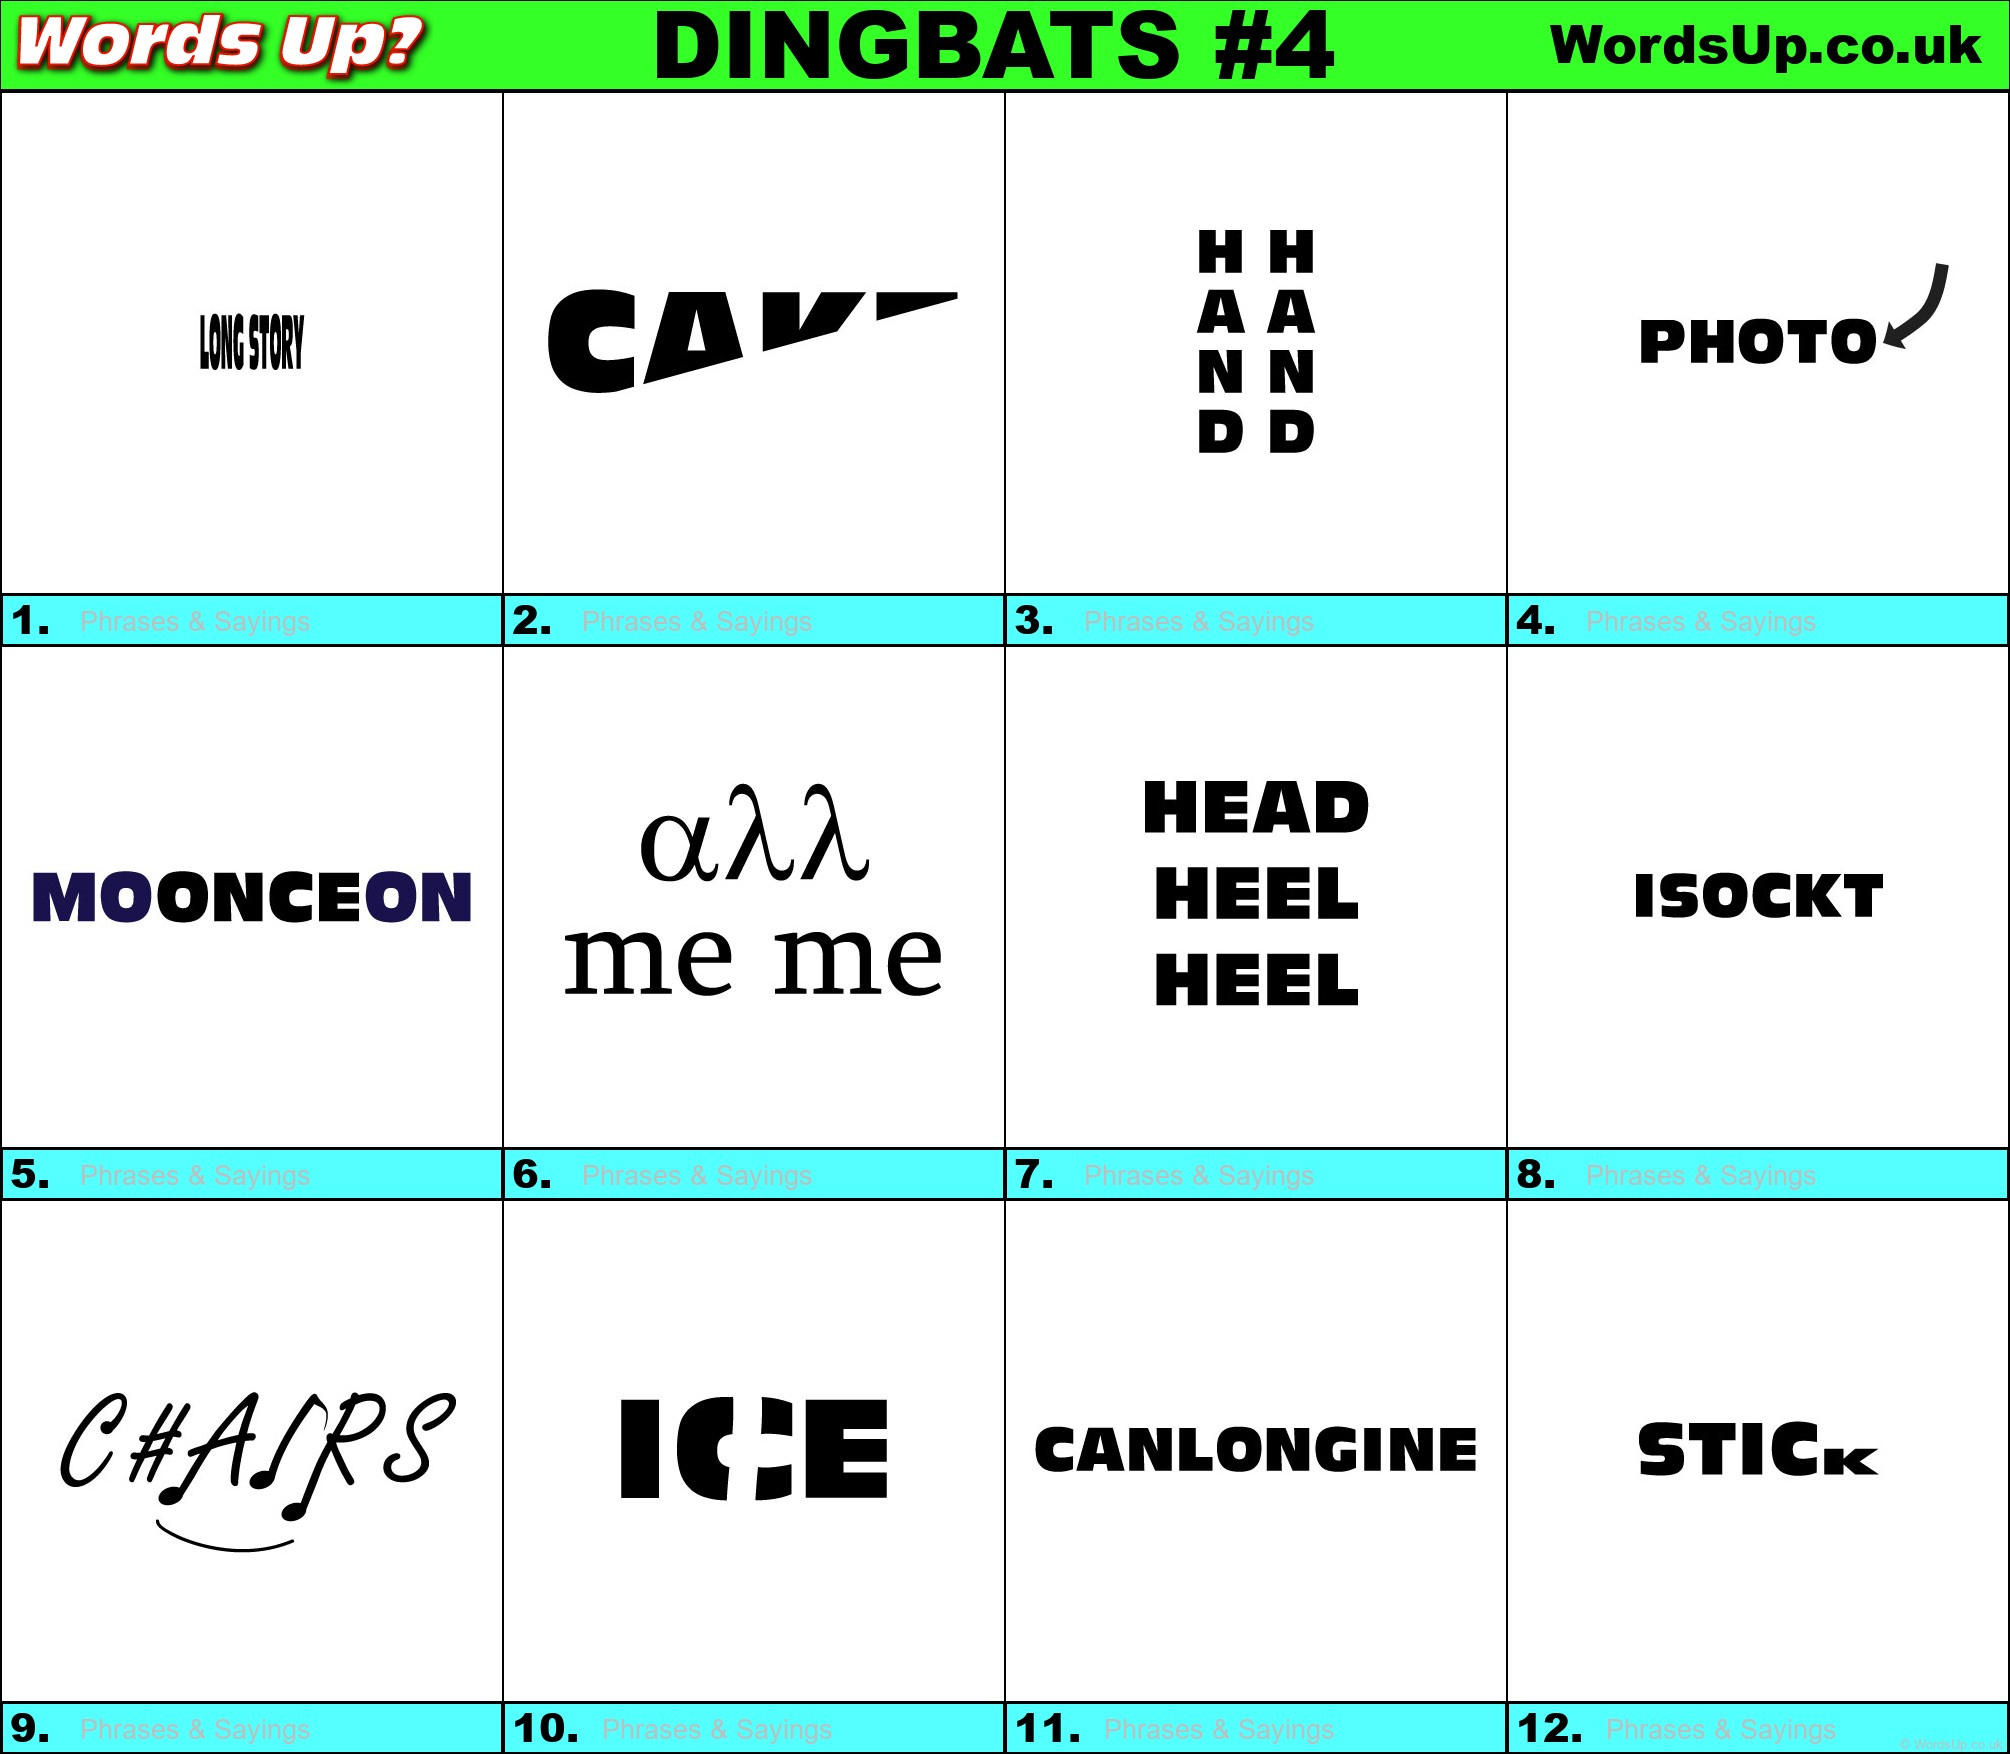 Dingbats Quiz 4 Find The Answers To Over 700 Dingbats Words Up Games